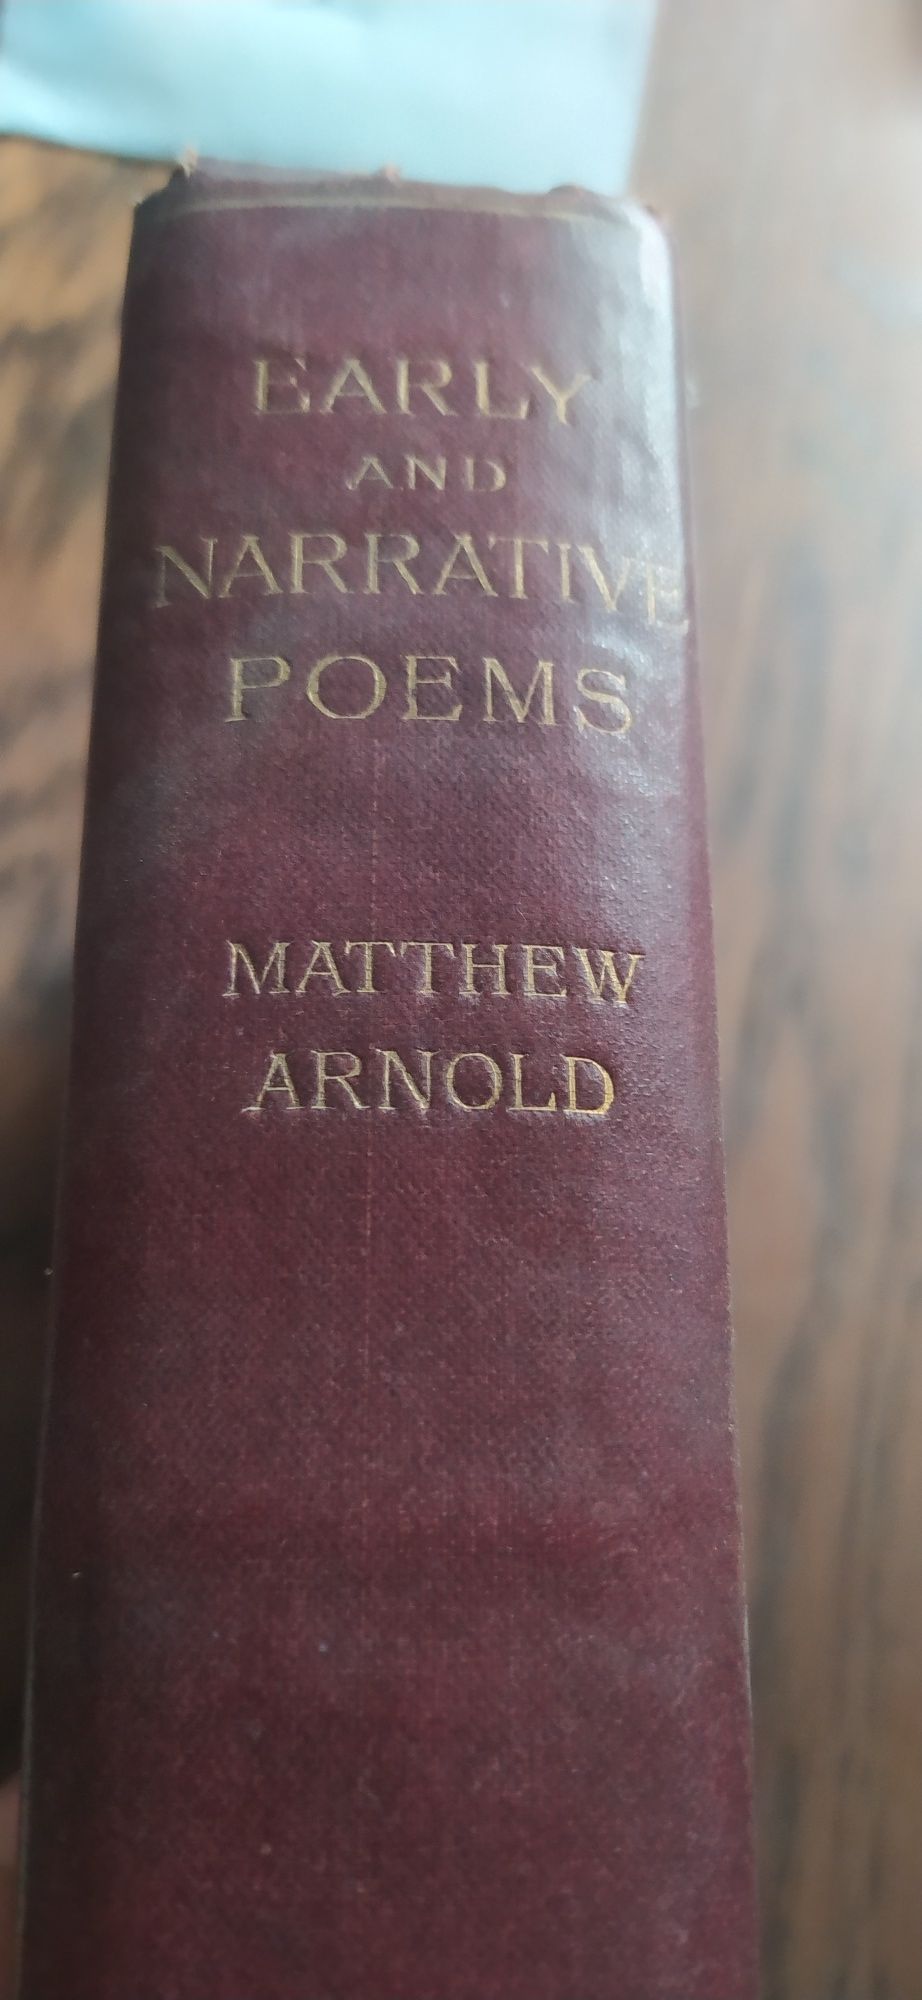 Early Poems, Narrative Poems, And Sonnets Matthew Arnold